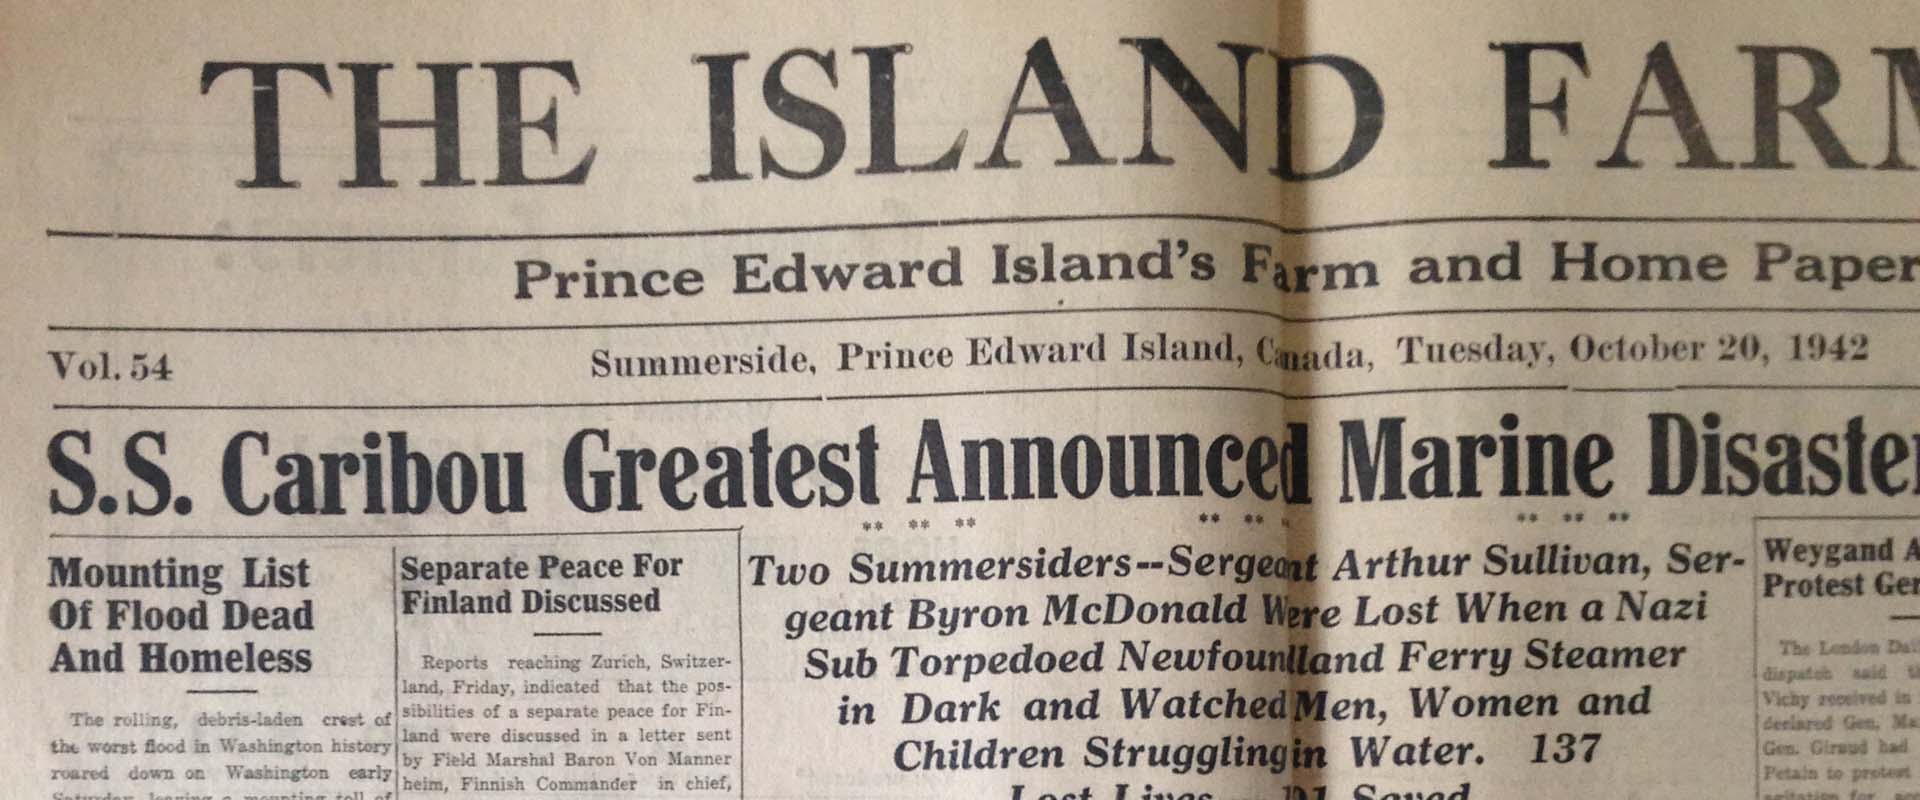 Part of the front page of a 1942 copy of the Island Farmer newspaper from Prince Edward Island